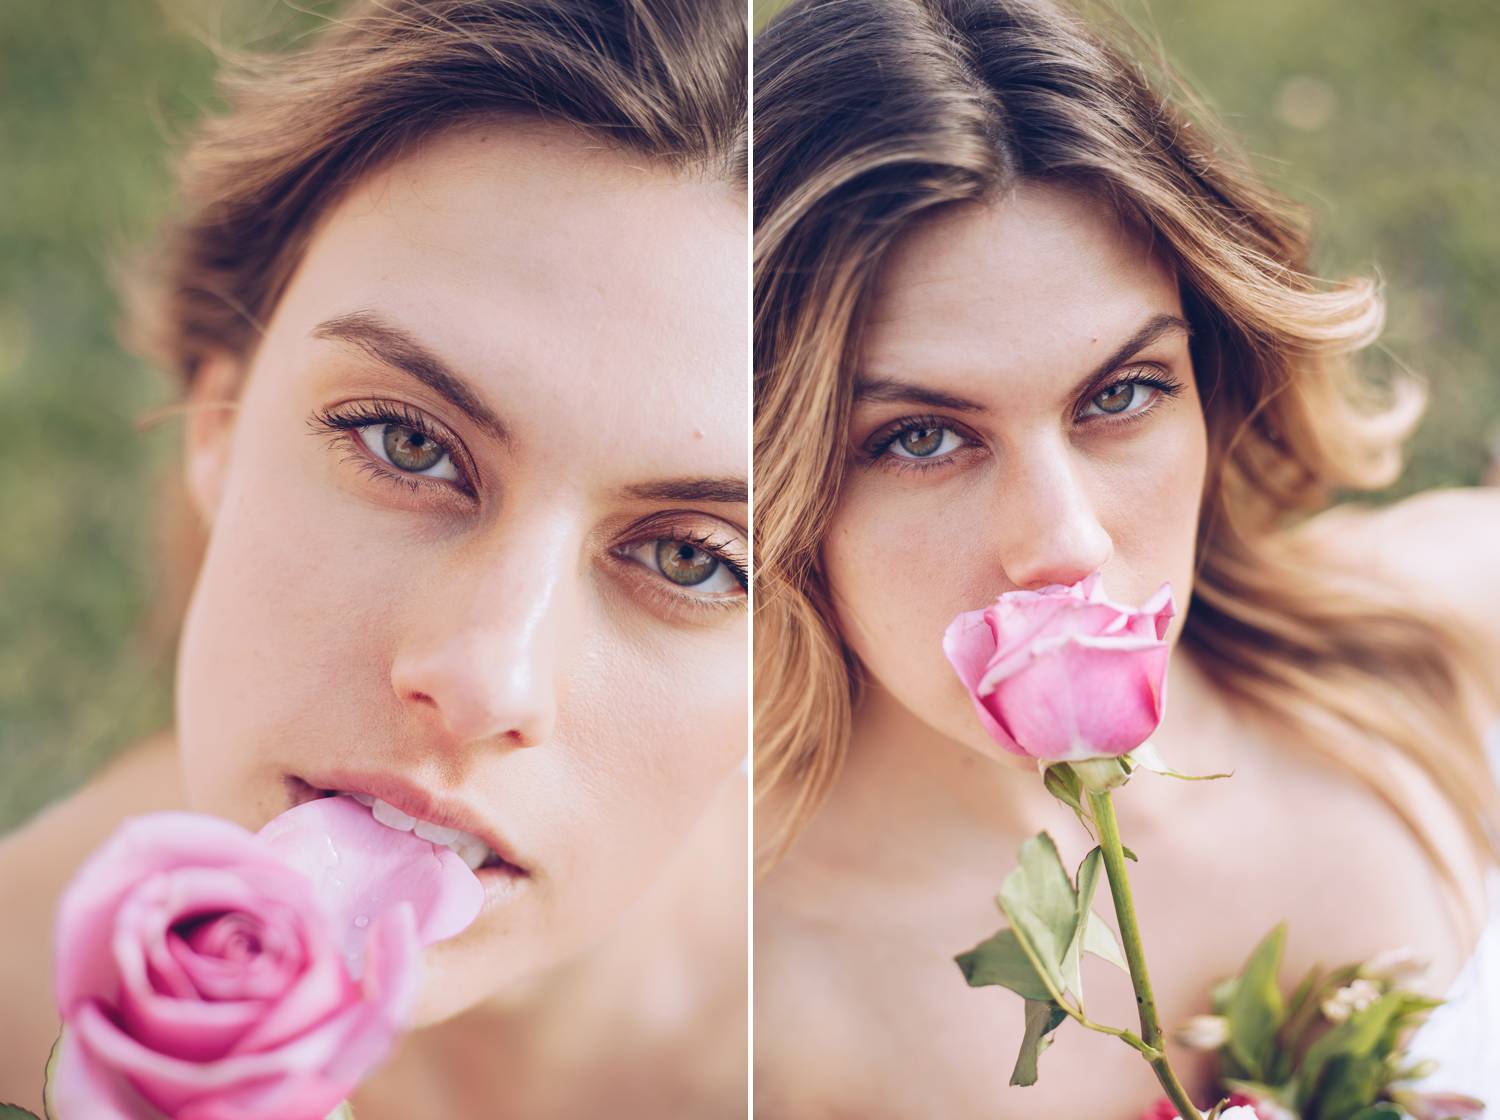 Soft beauty portraits of a model and a pink rose